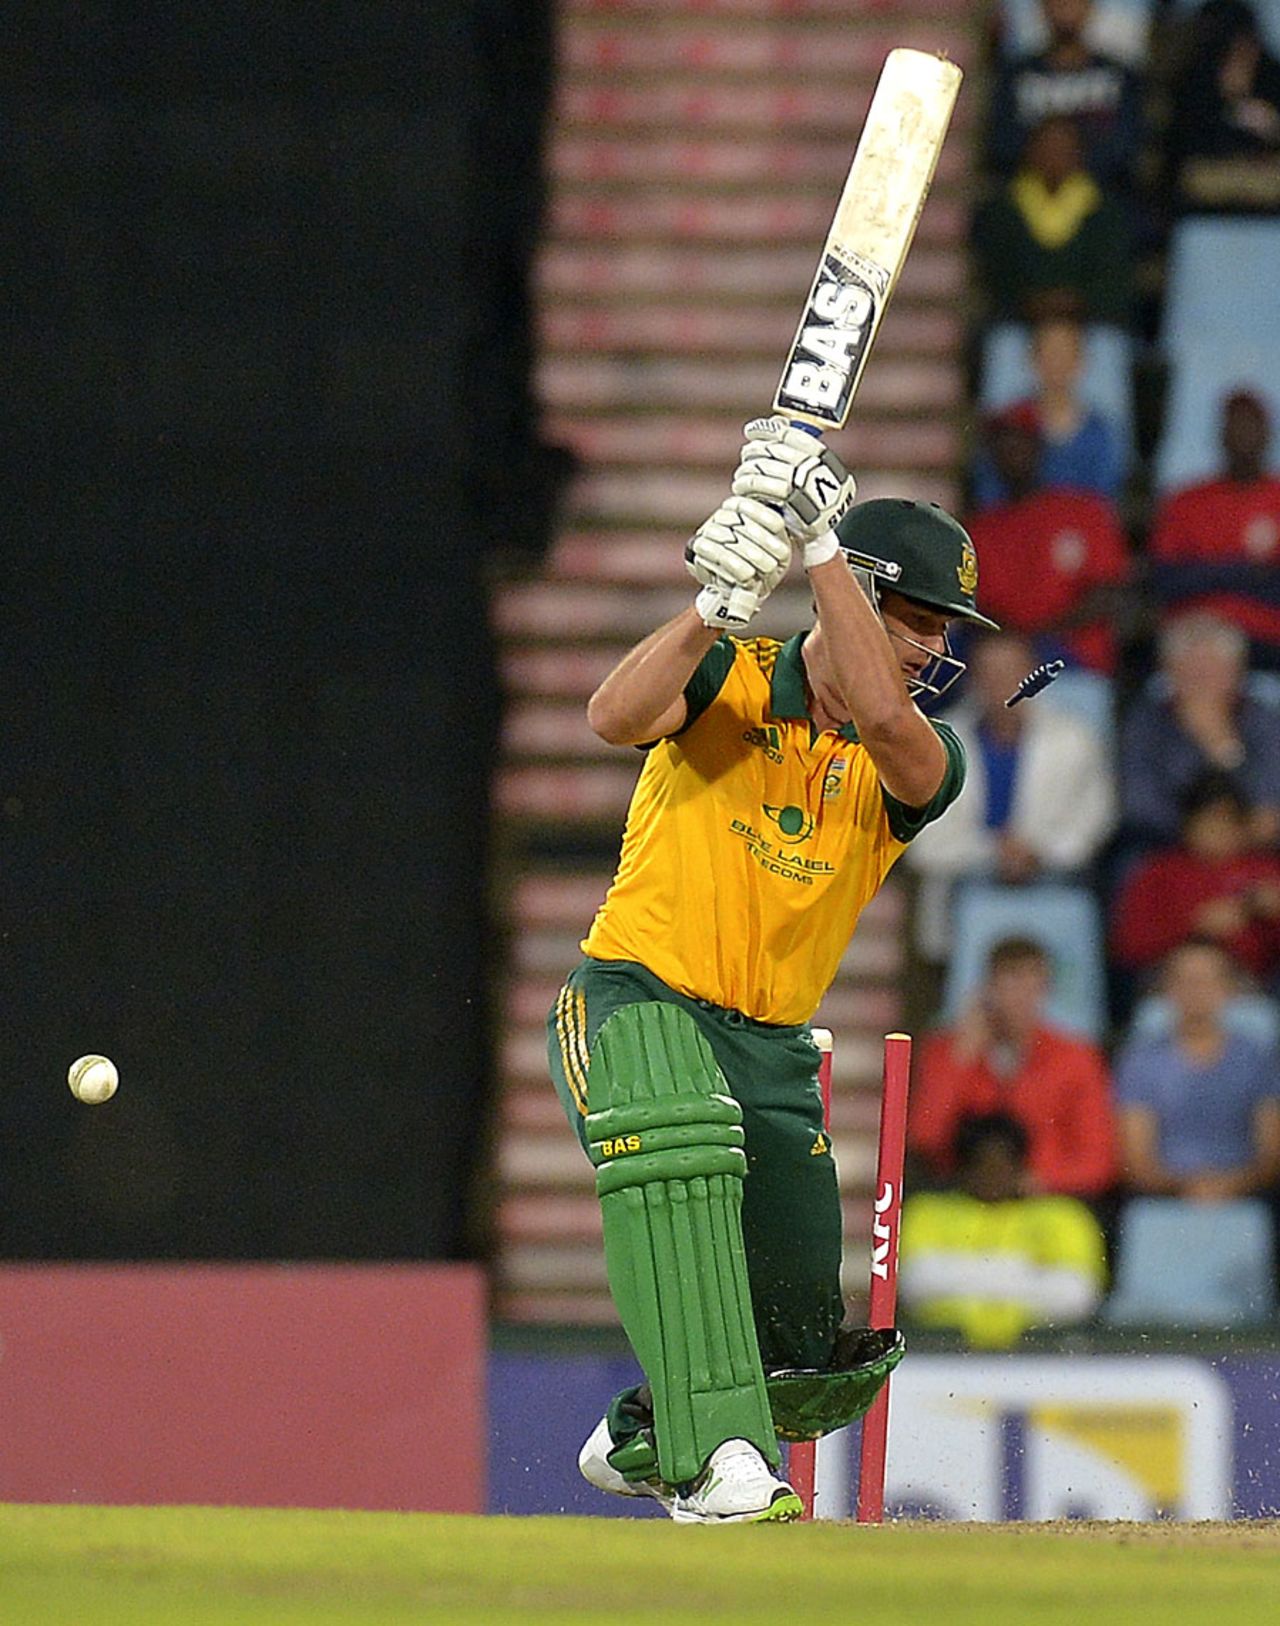 Albie Morkel was bowled by Mitchell Starc, South Africa v Australia, 3rd T20, Centurion, March 14, 2014